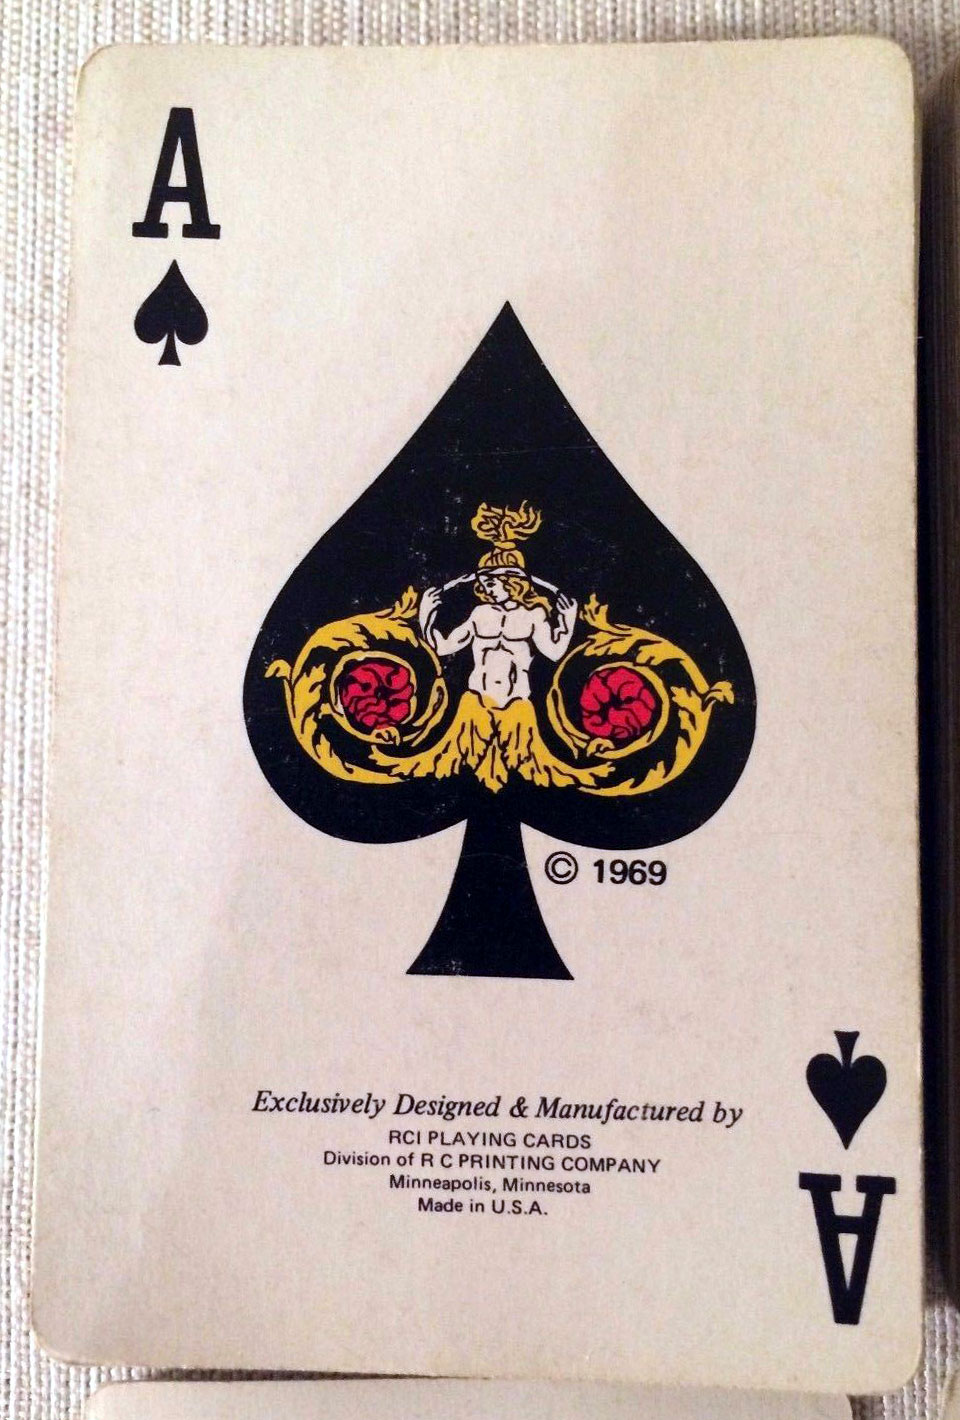 RCI Playing Cards — The World of Playing